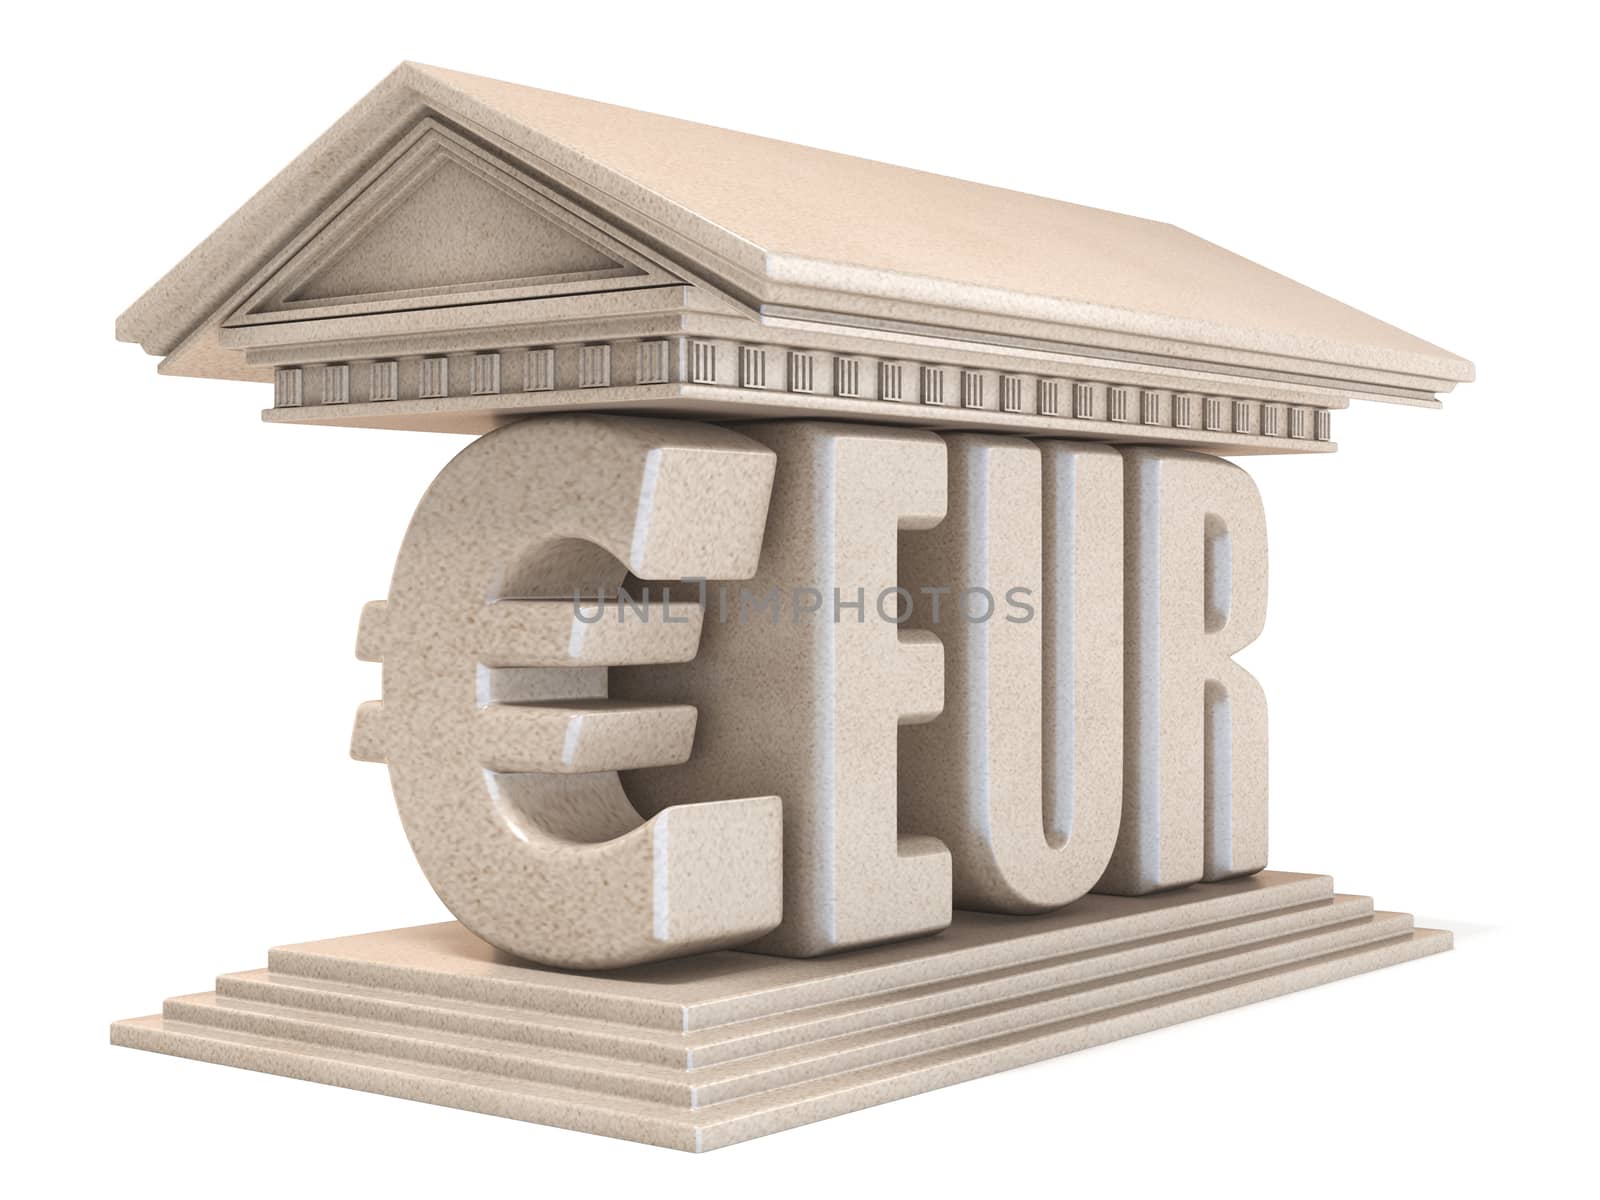 Euro EUR currency sign temple 3D render illustration isolated on white background